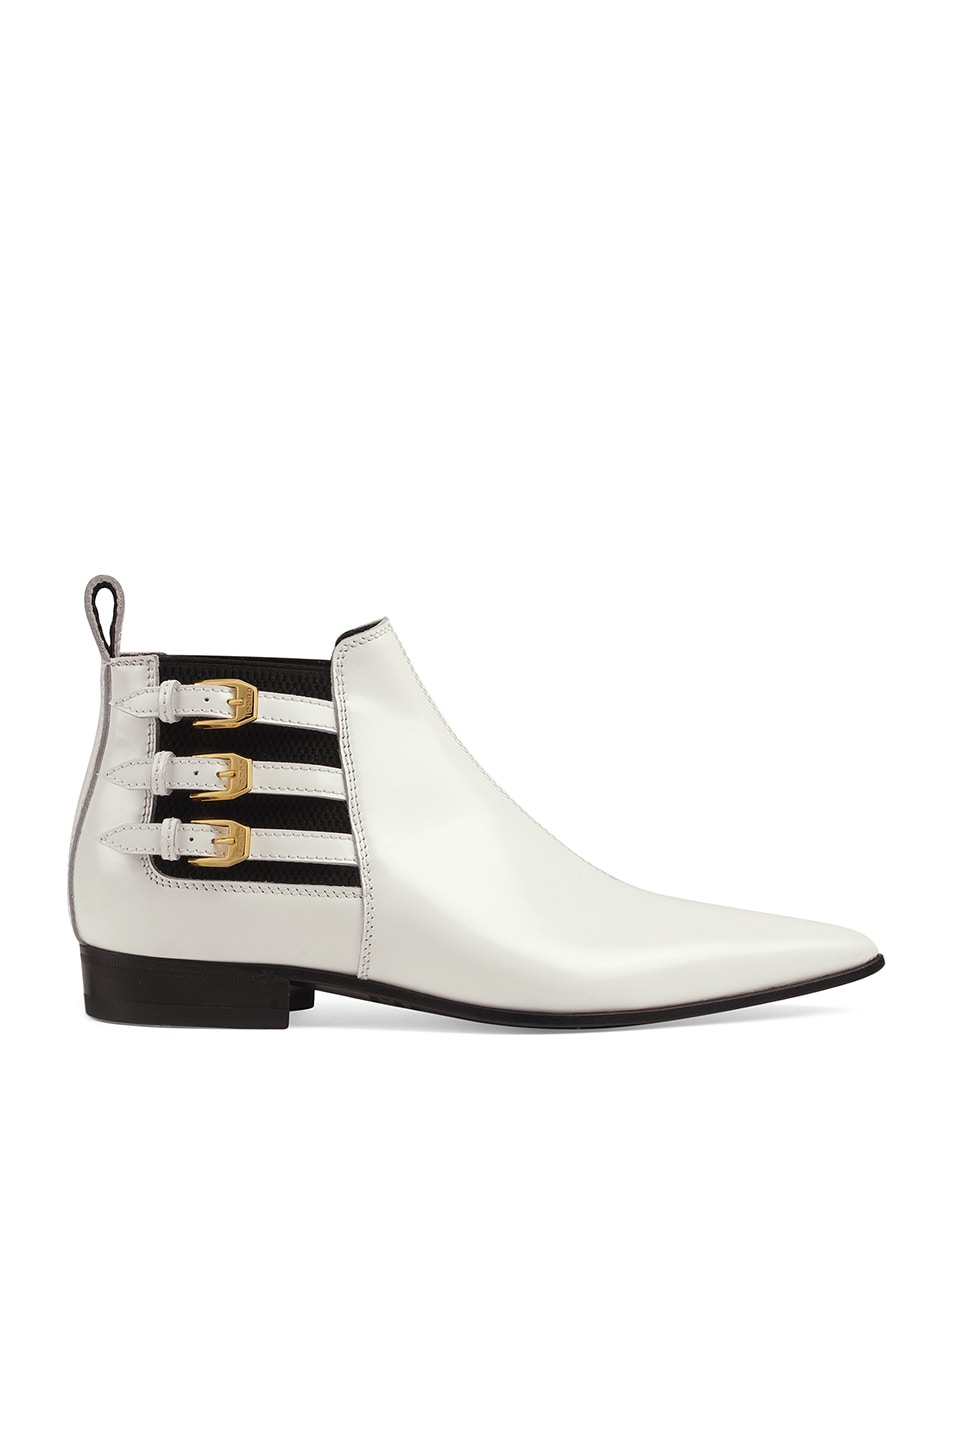 Image 1 of Gucci Leather Ankle Boots in Great White & Black